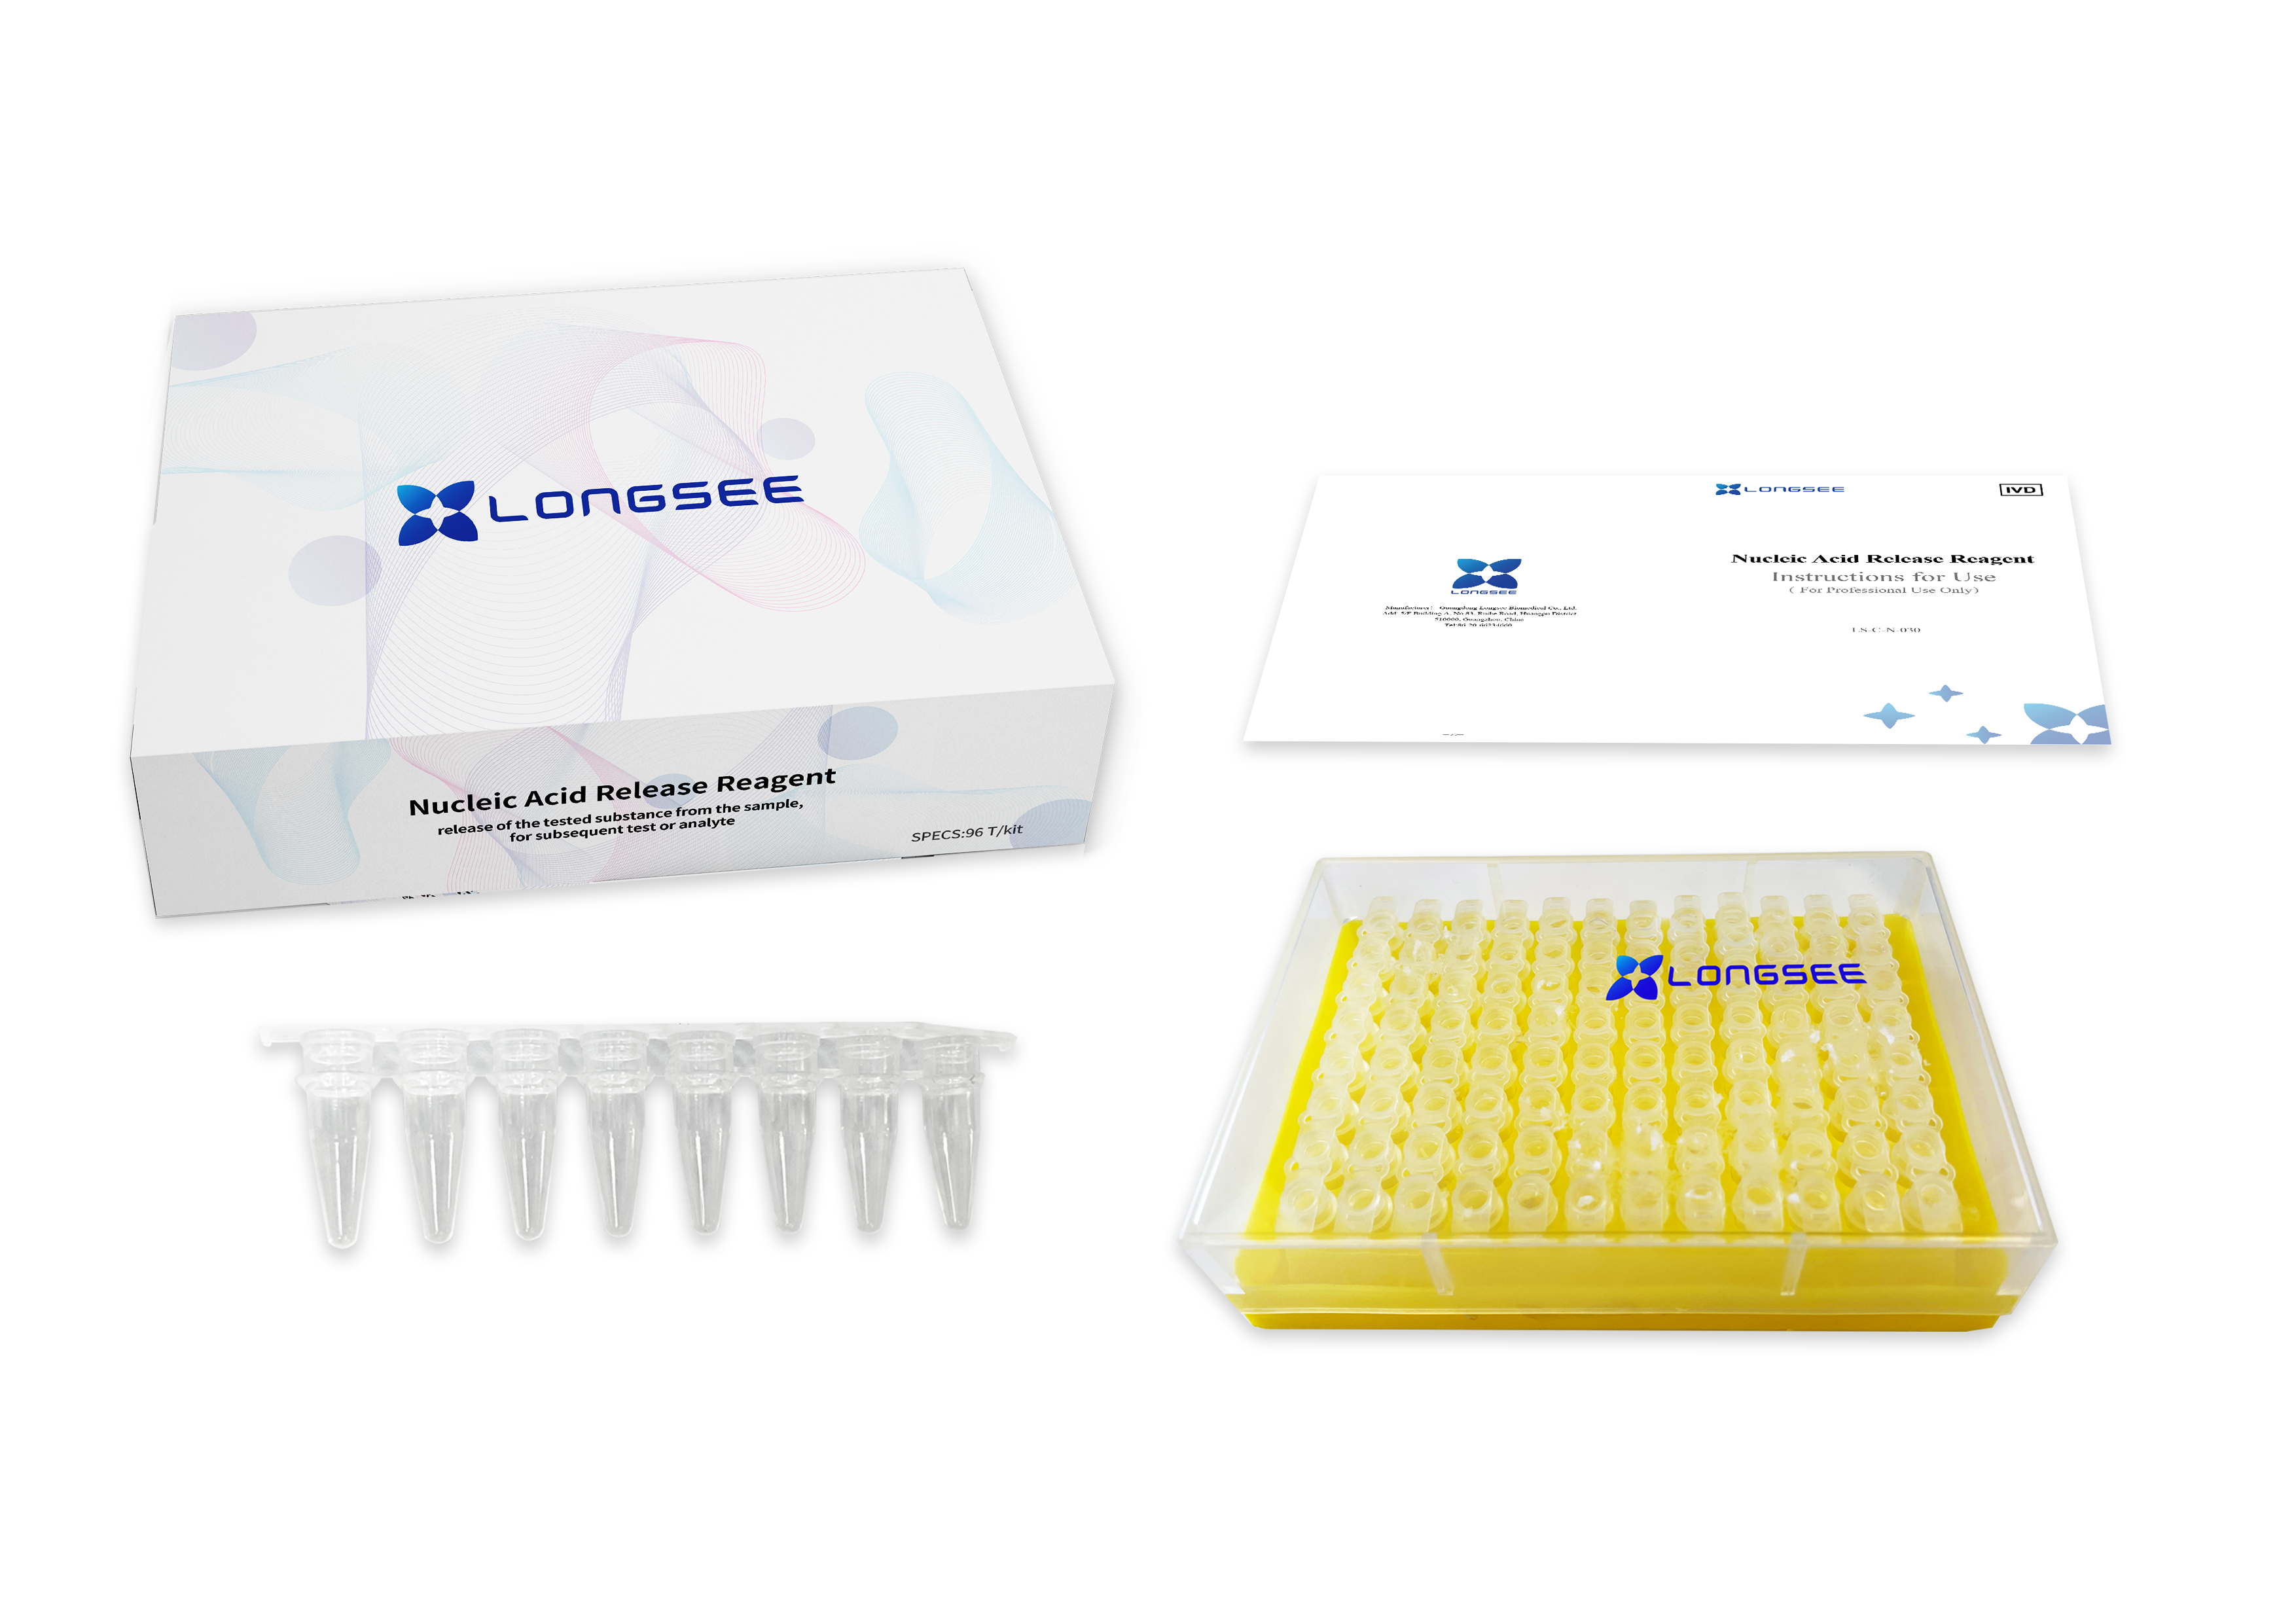 Nucleic Acid Release Reagent （ For Professional Use Only）